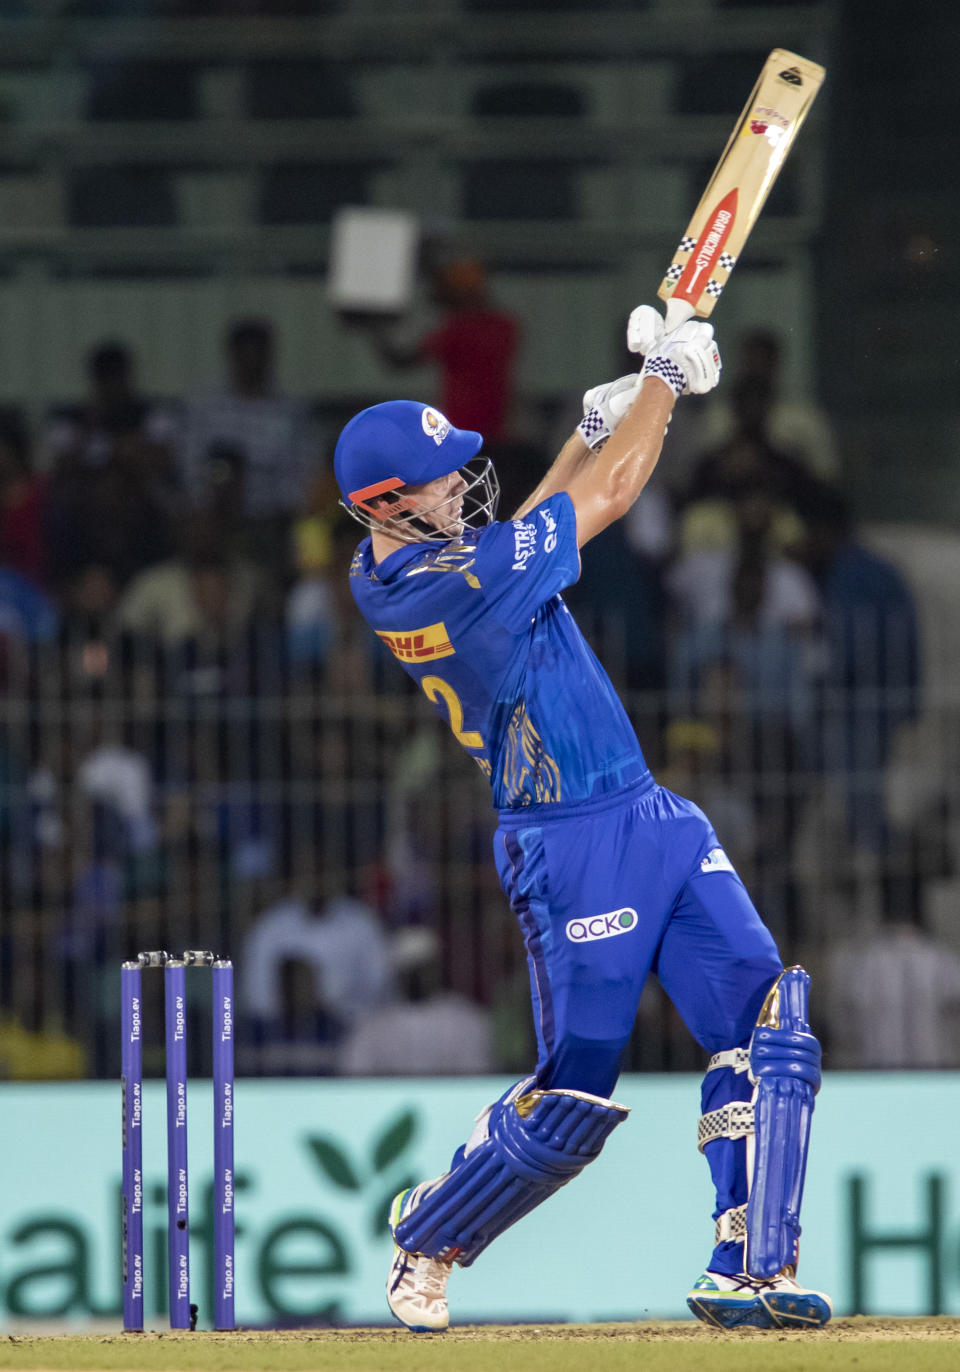 Mumbai Indians' Cameron Green plays a shot during the Indian Premier League cricket eliminator match between Mumbai Indians and Lucknow Super Giants in Chennai, India, Wednesday, May 24, 2023. (AP Photo /R. Parthibhan)